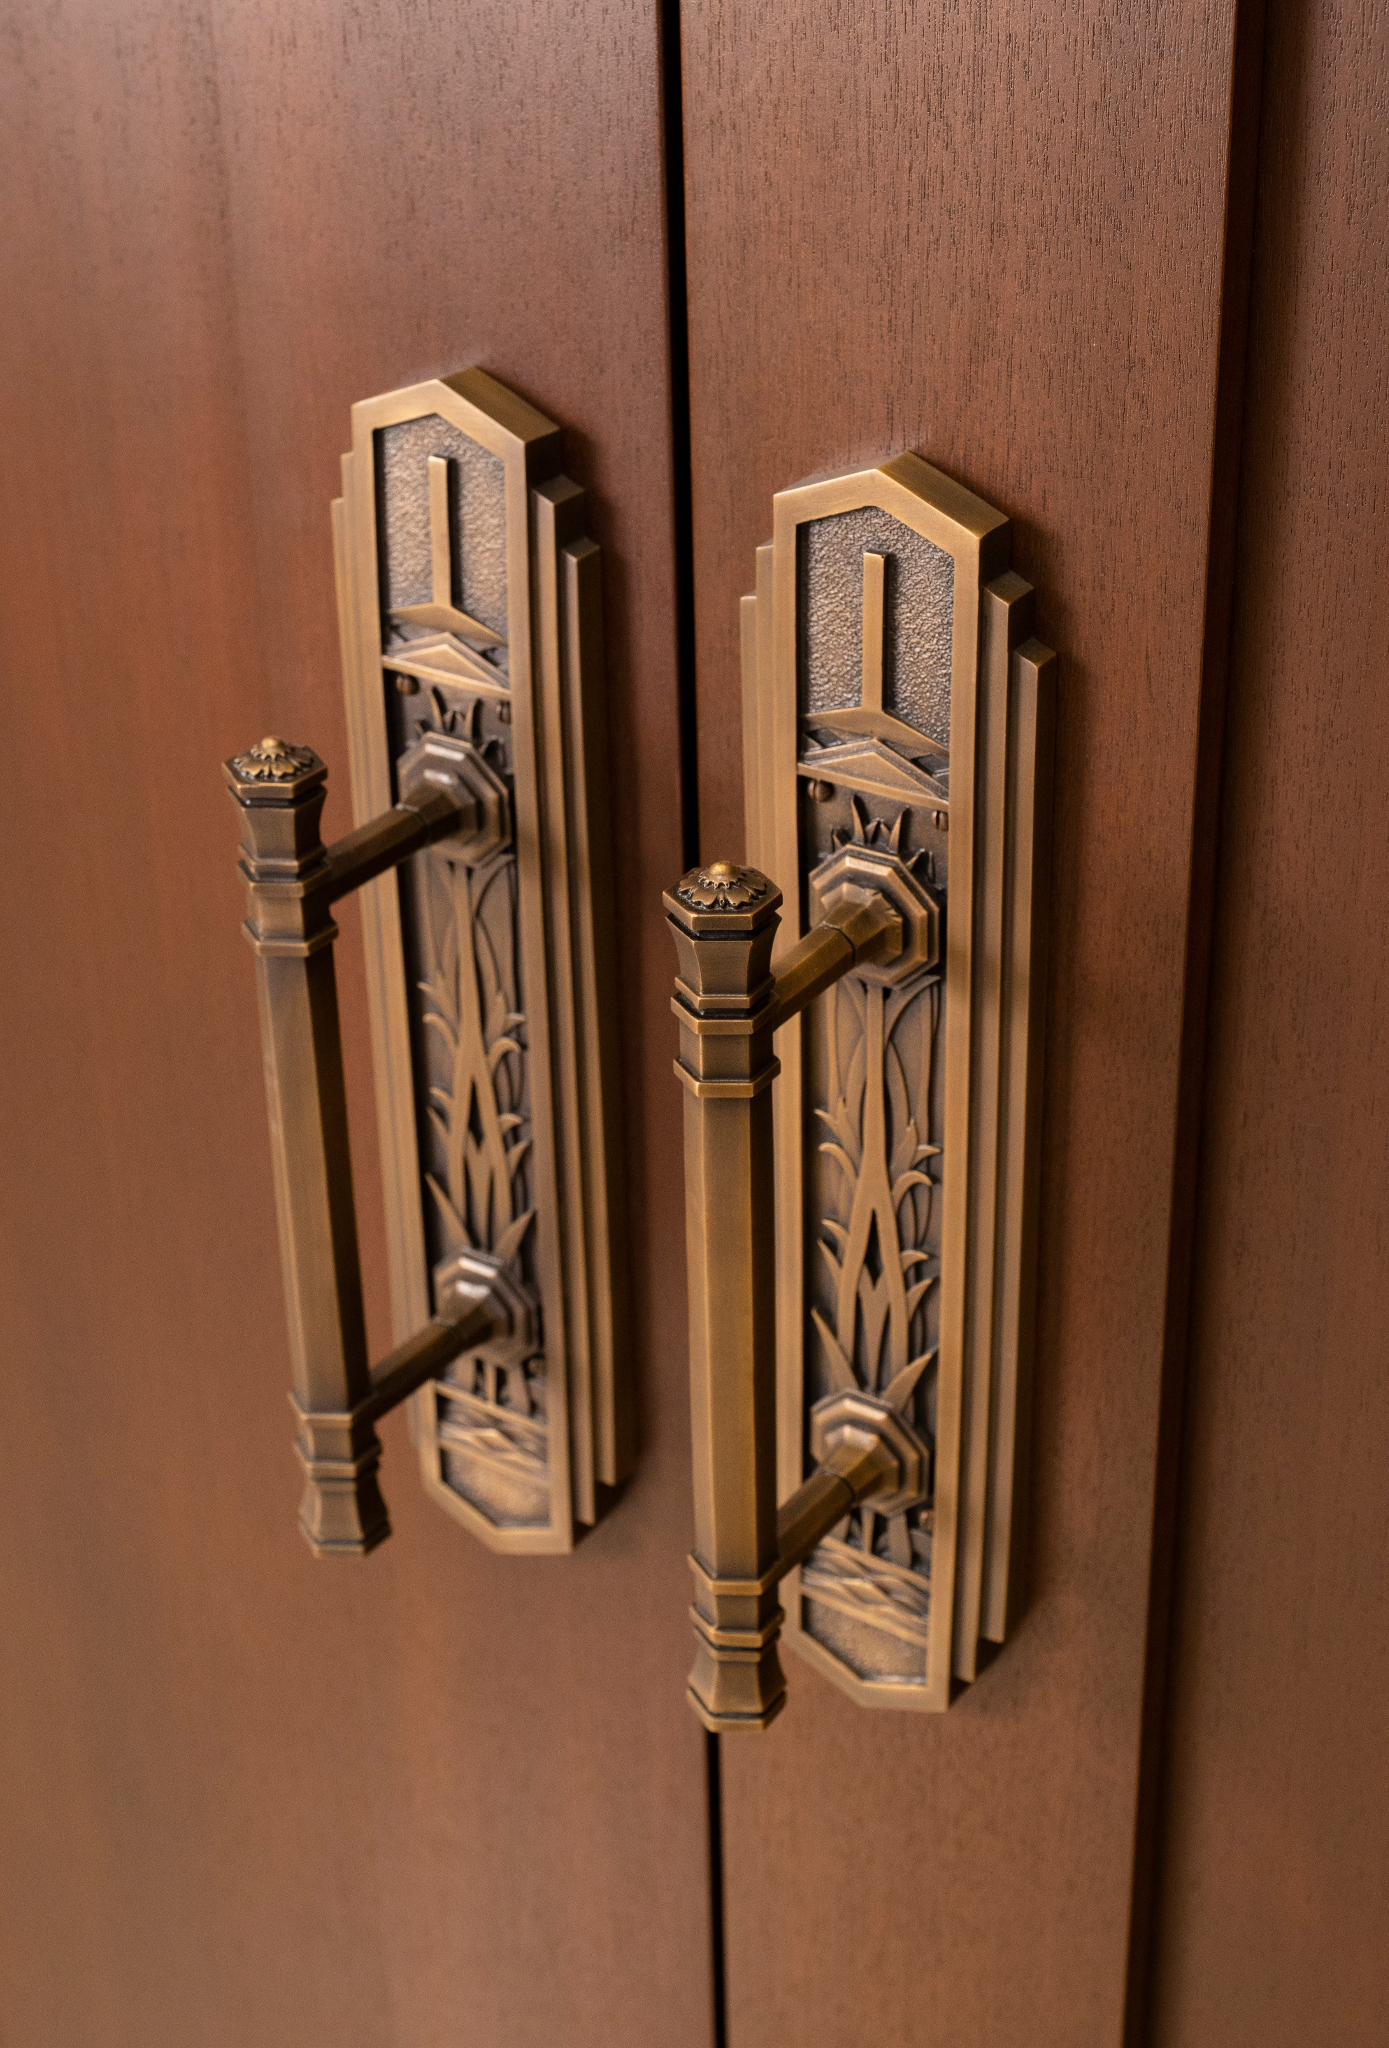 A close-up of metal door handles carved with the designs of water and wetland grass.